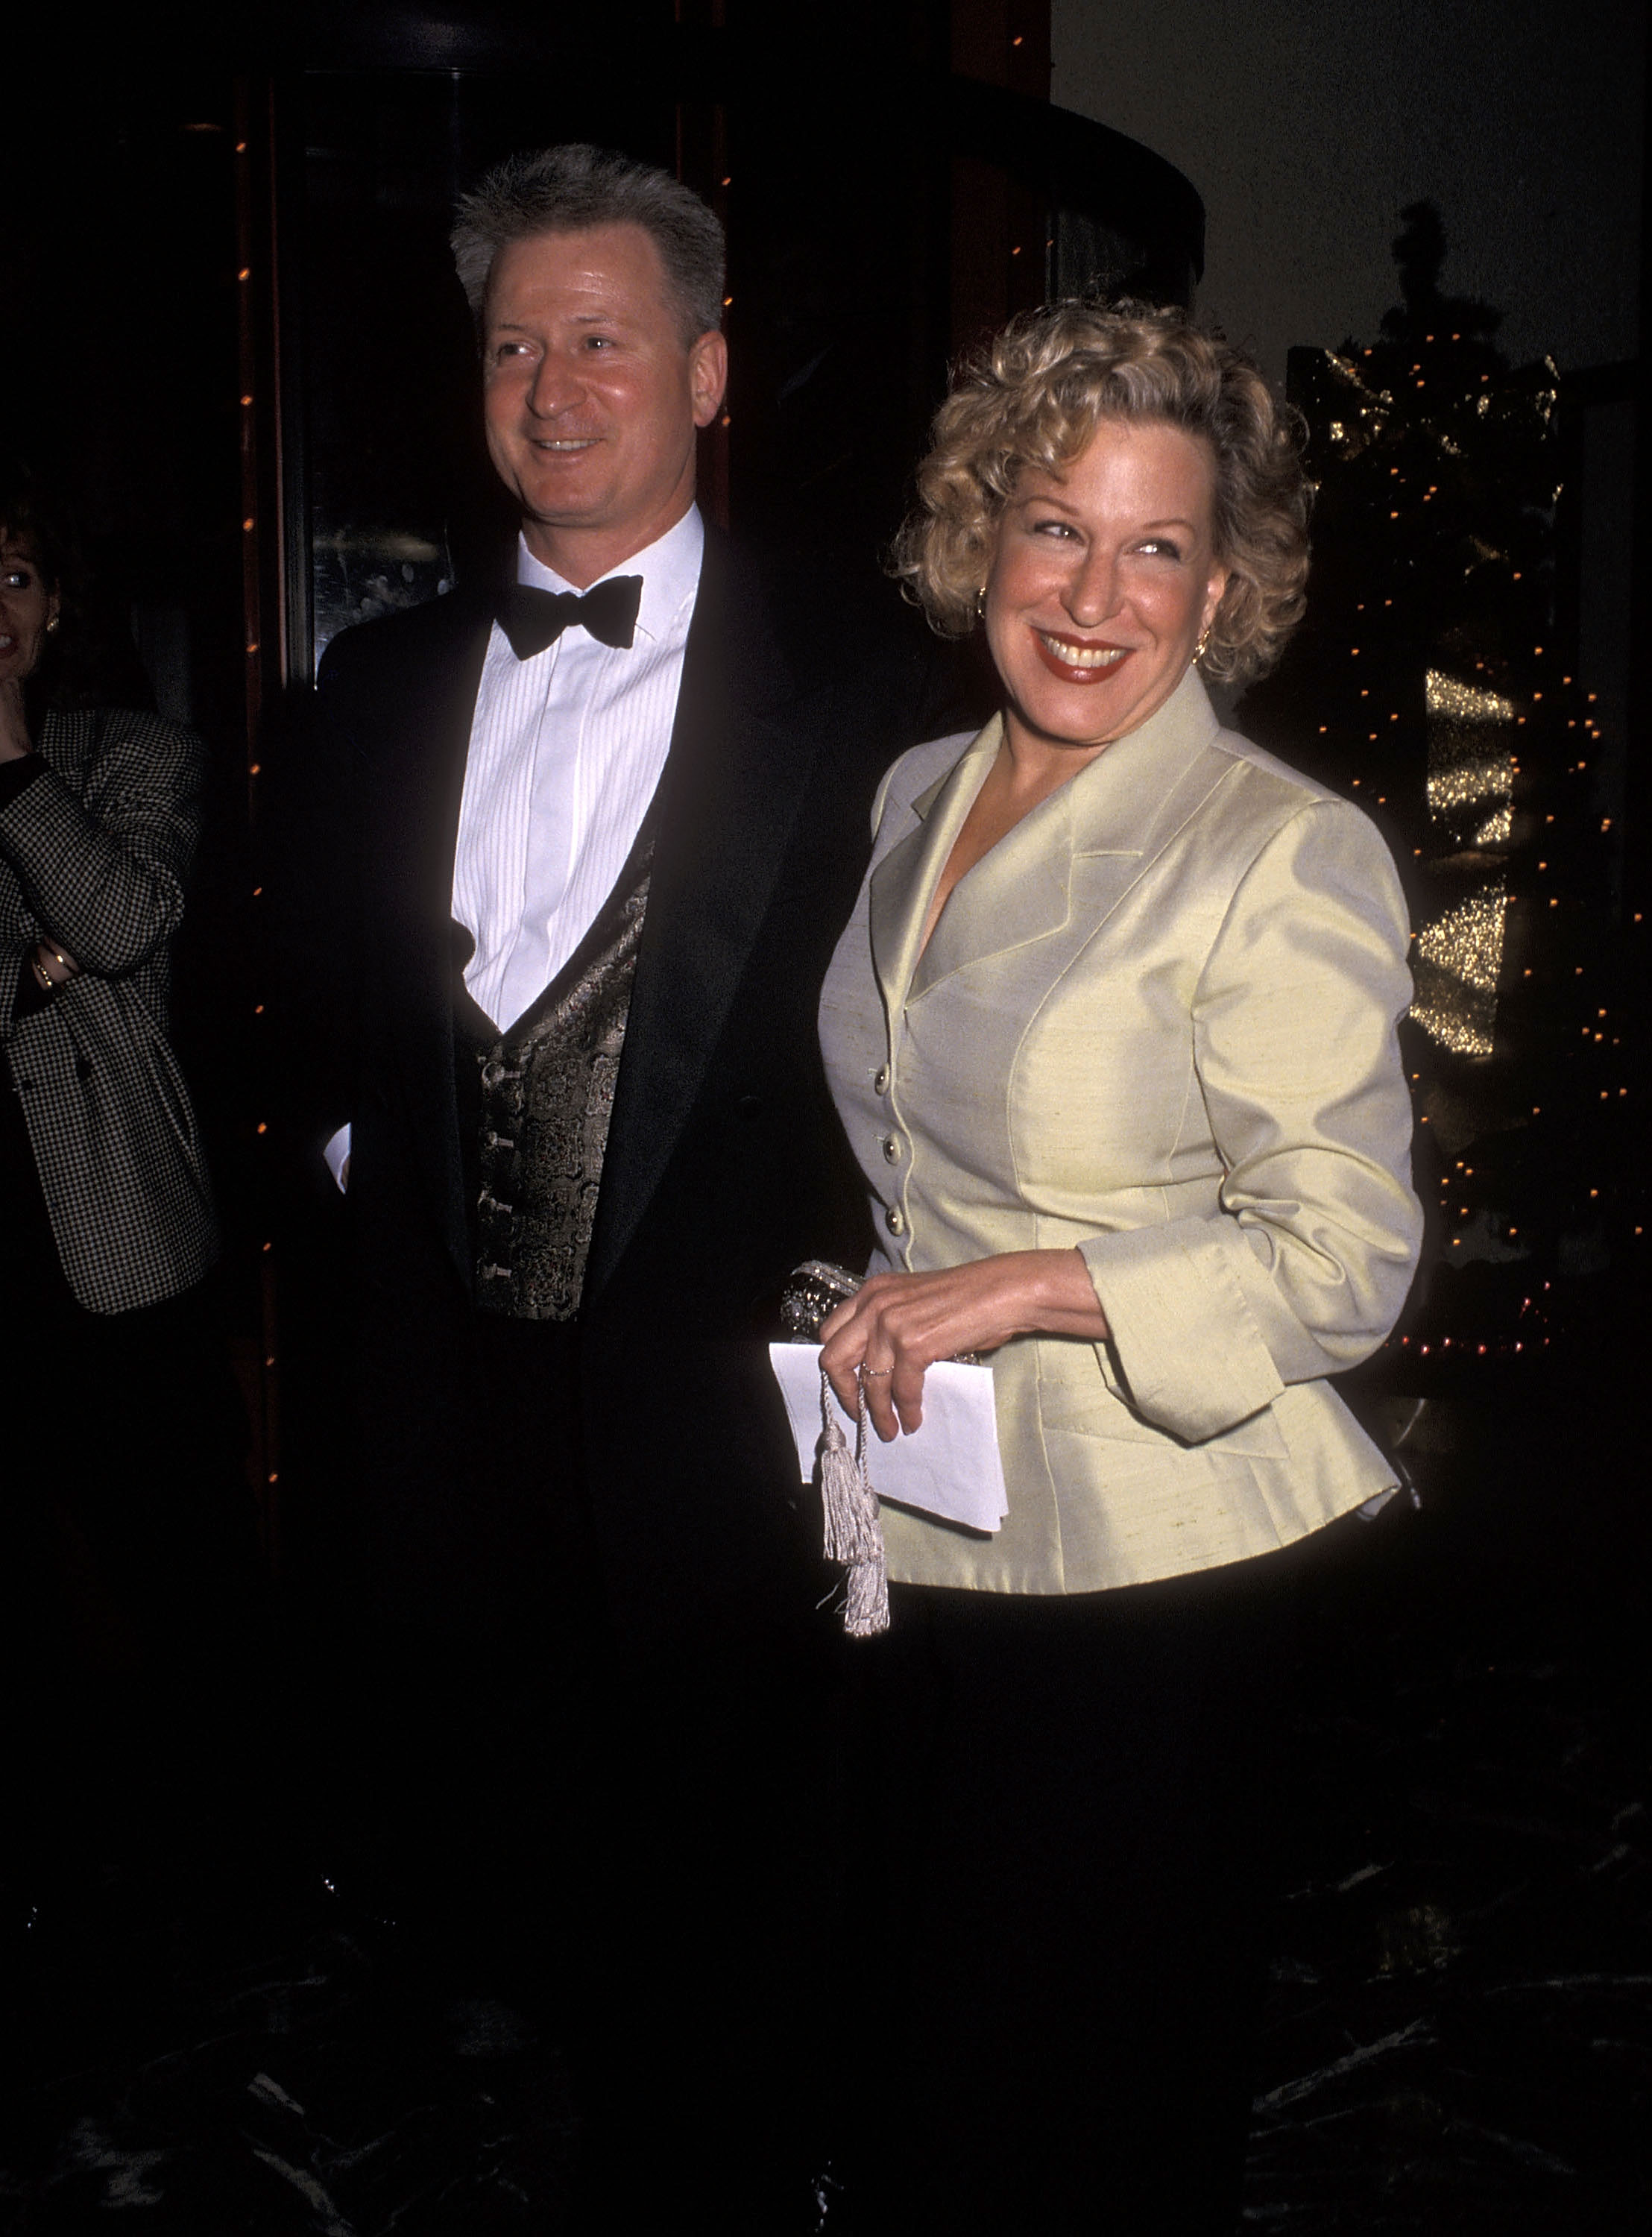 Bette Midler and Martin von Haselberg in New York in 1998 | Source: Getty Images